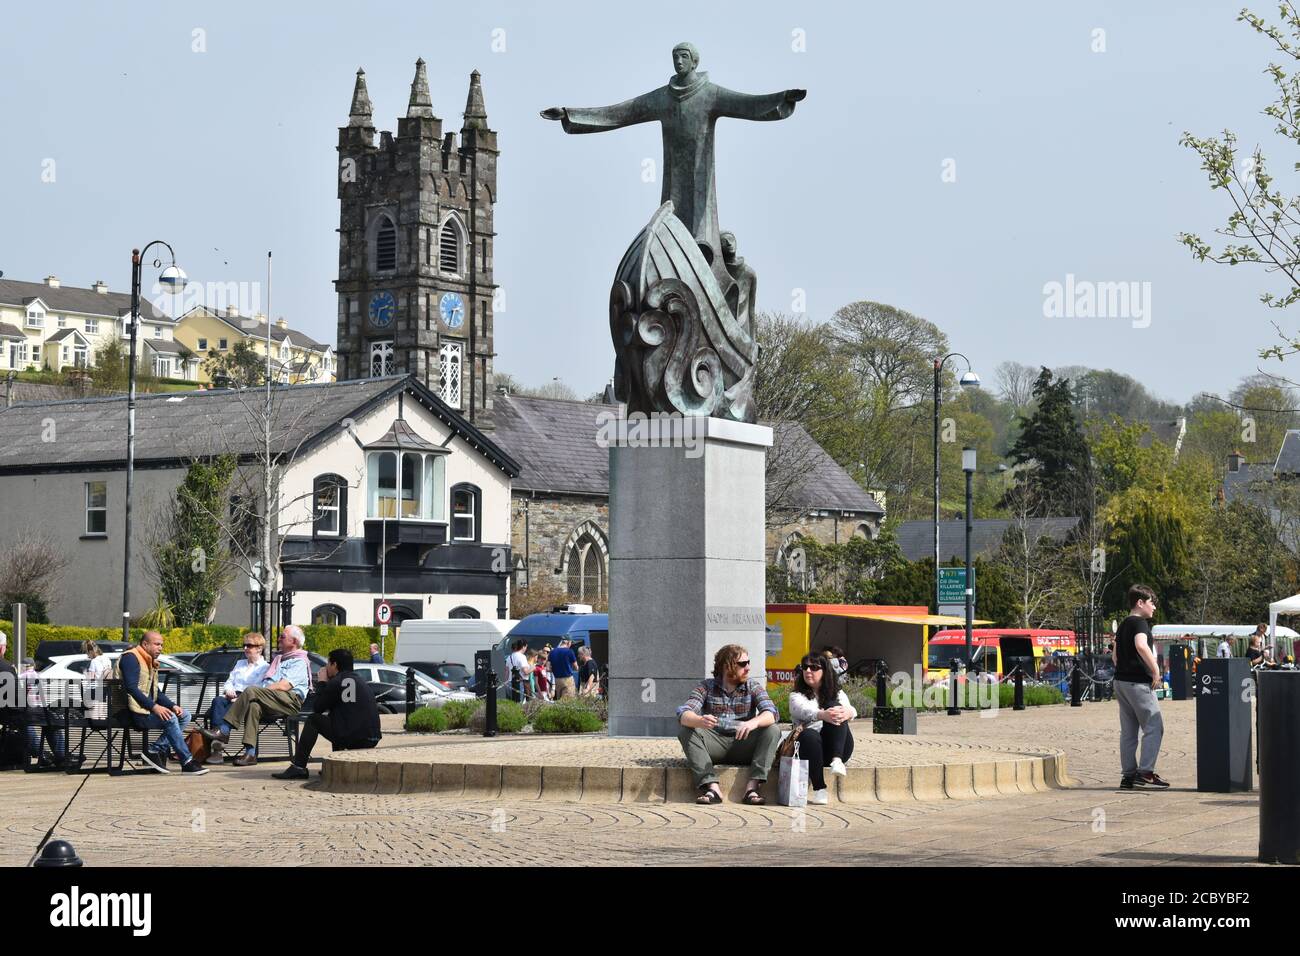 In the Summer of 2019, Bantry was visited by many tourists, photo taken in Wolfe Tone Square during Fridays Farmers market. Stock Photo